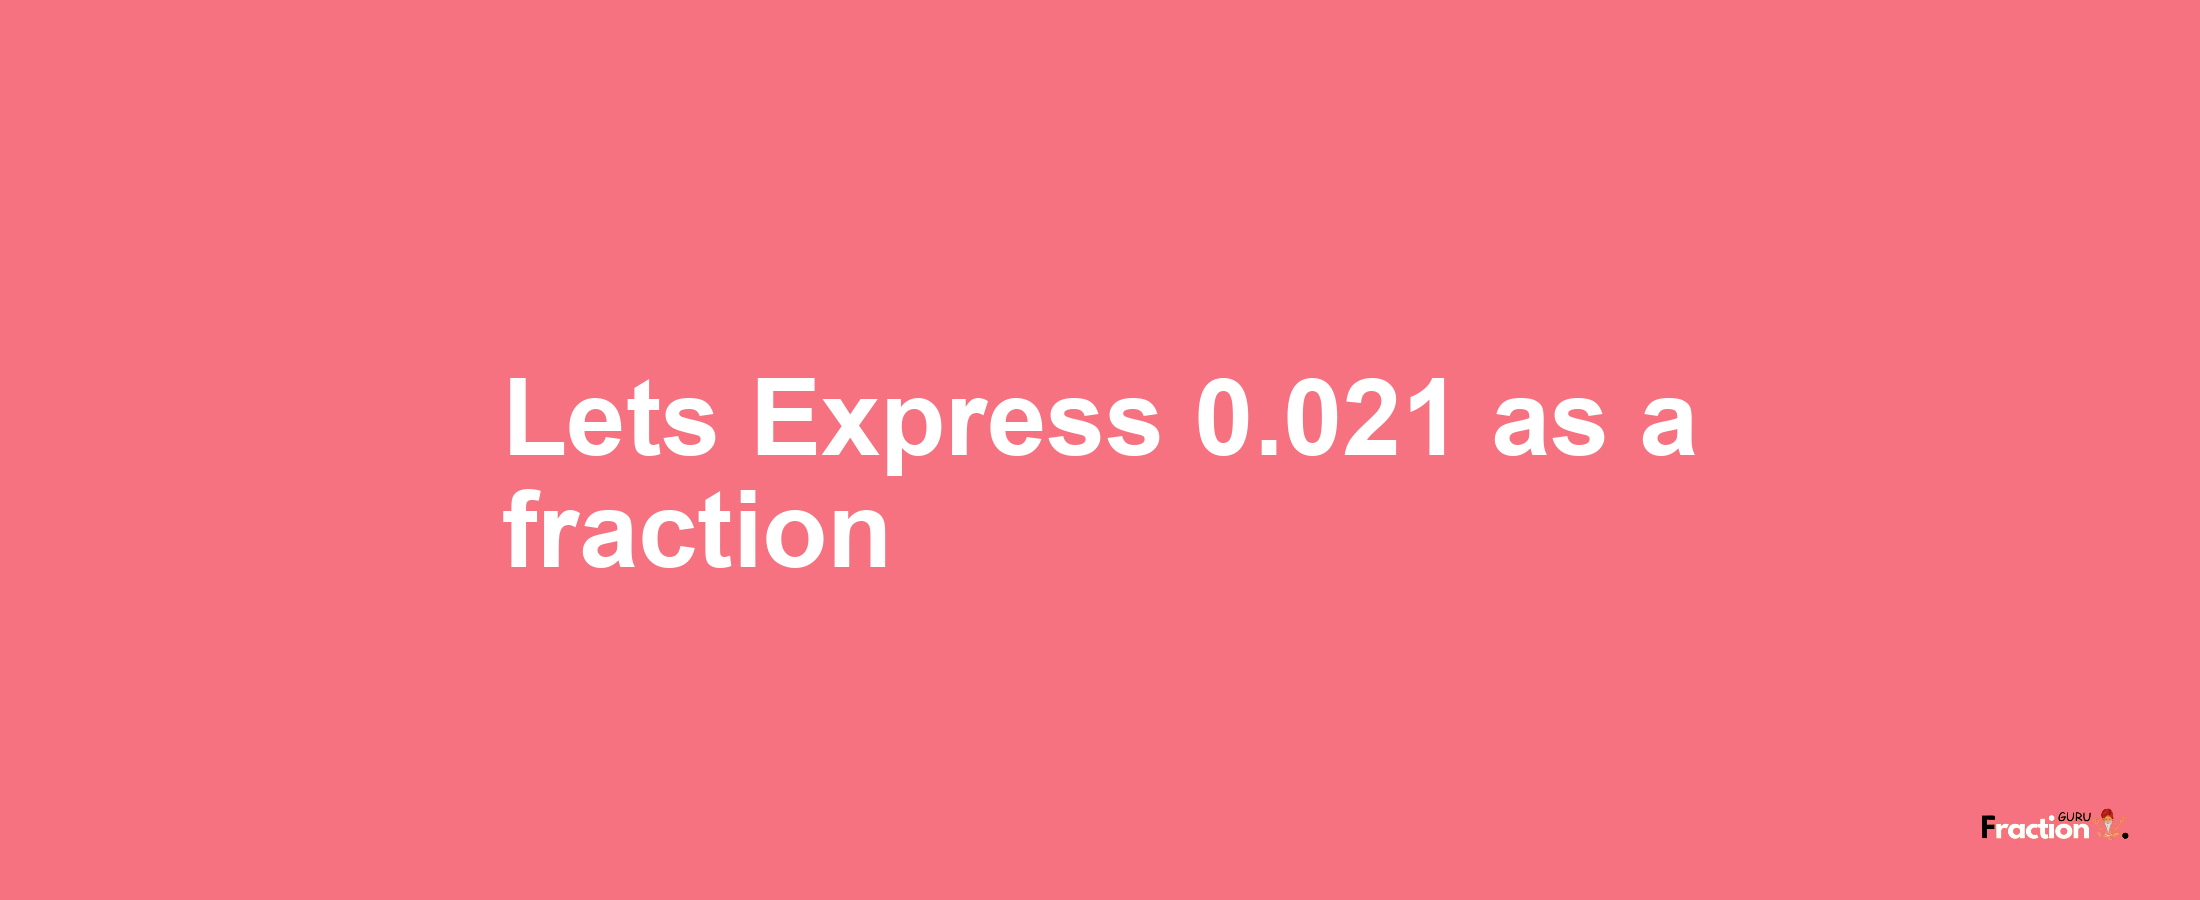 Lets Express 0.021 as afraction